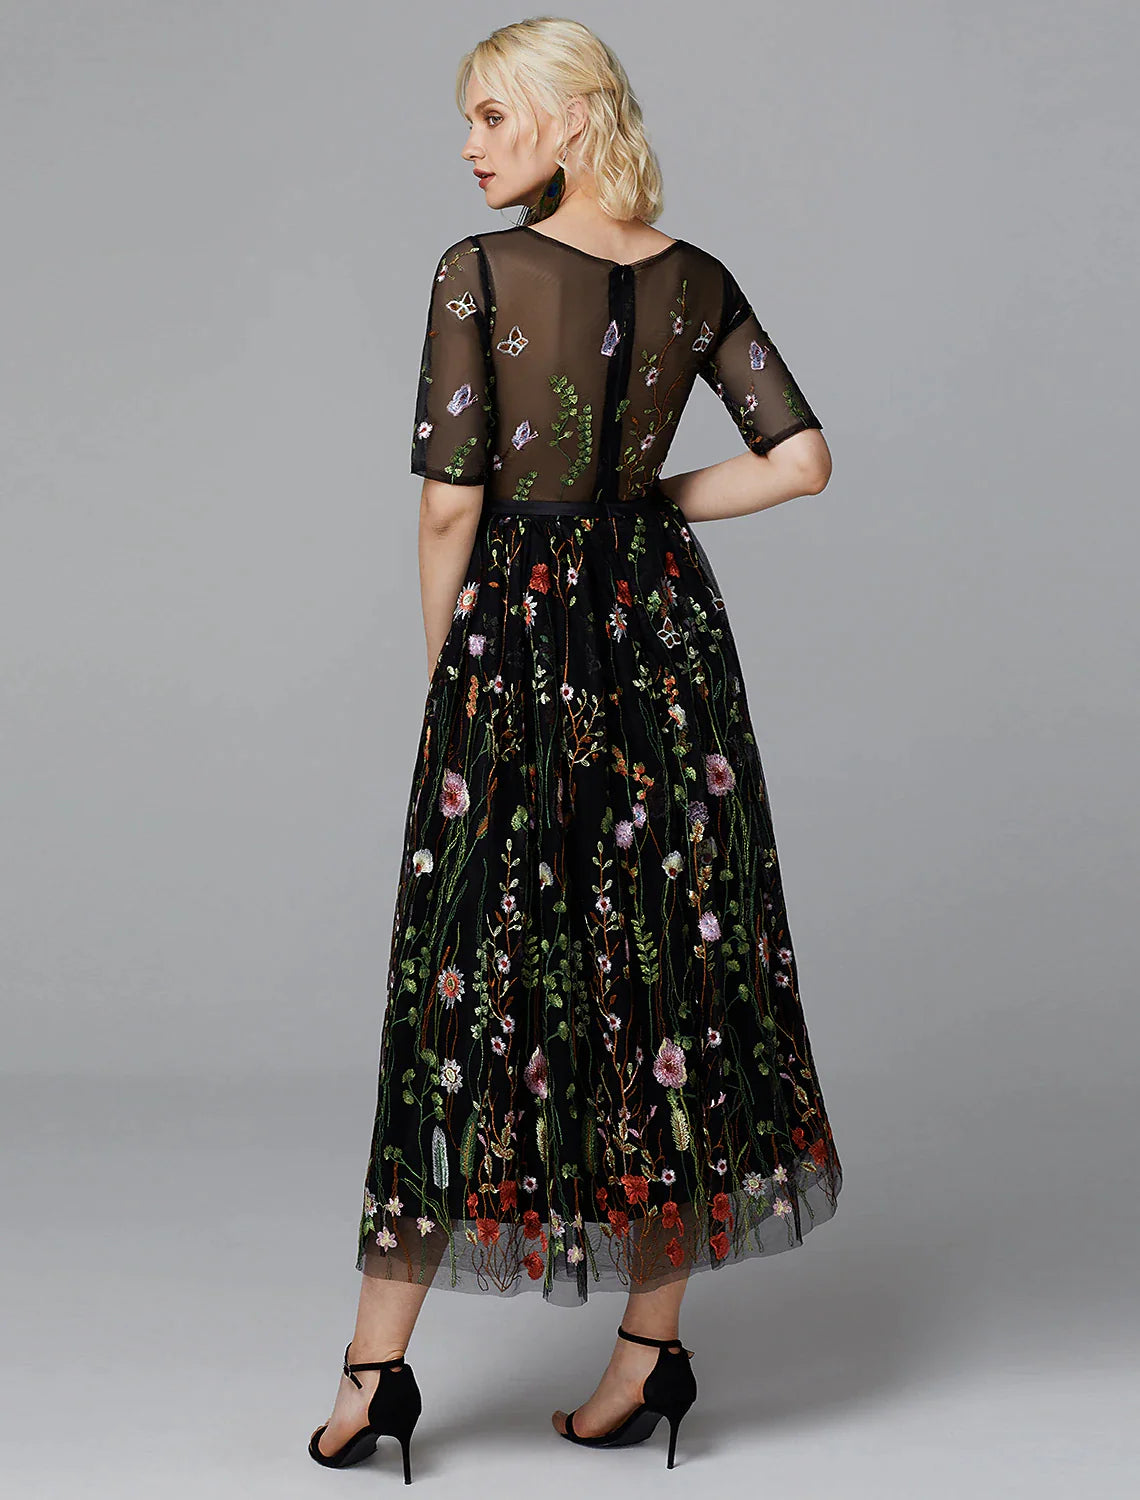 A-Line Floral Dress Holiday Tea Length Half Sleeve Illusion Neck Lace with Embroidery Appliques